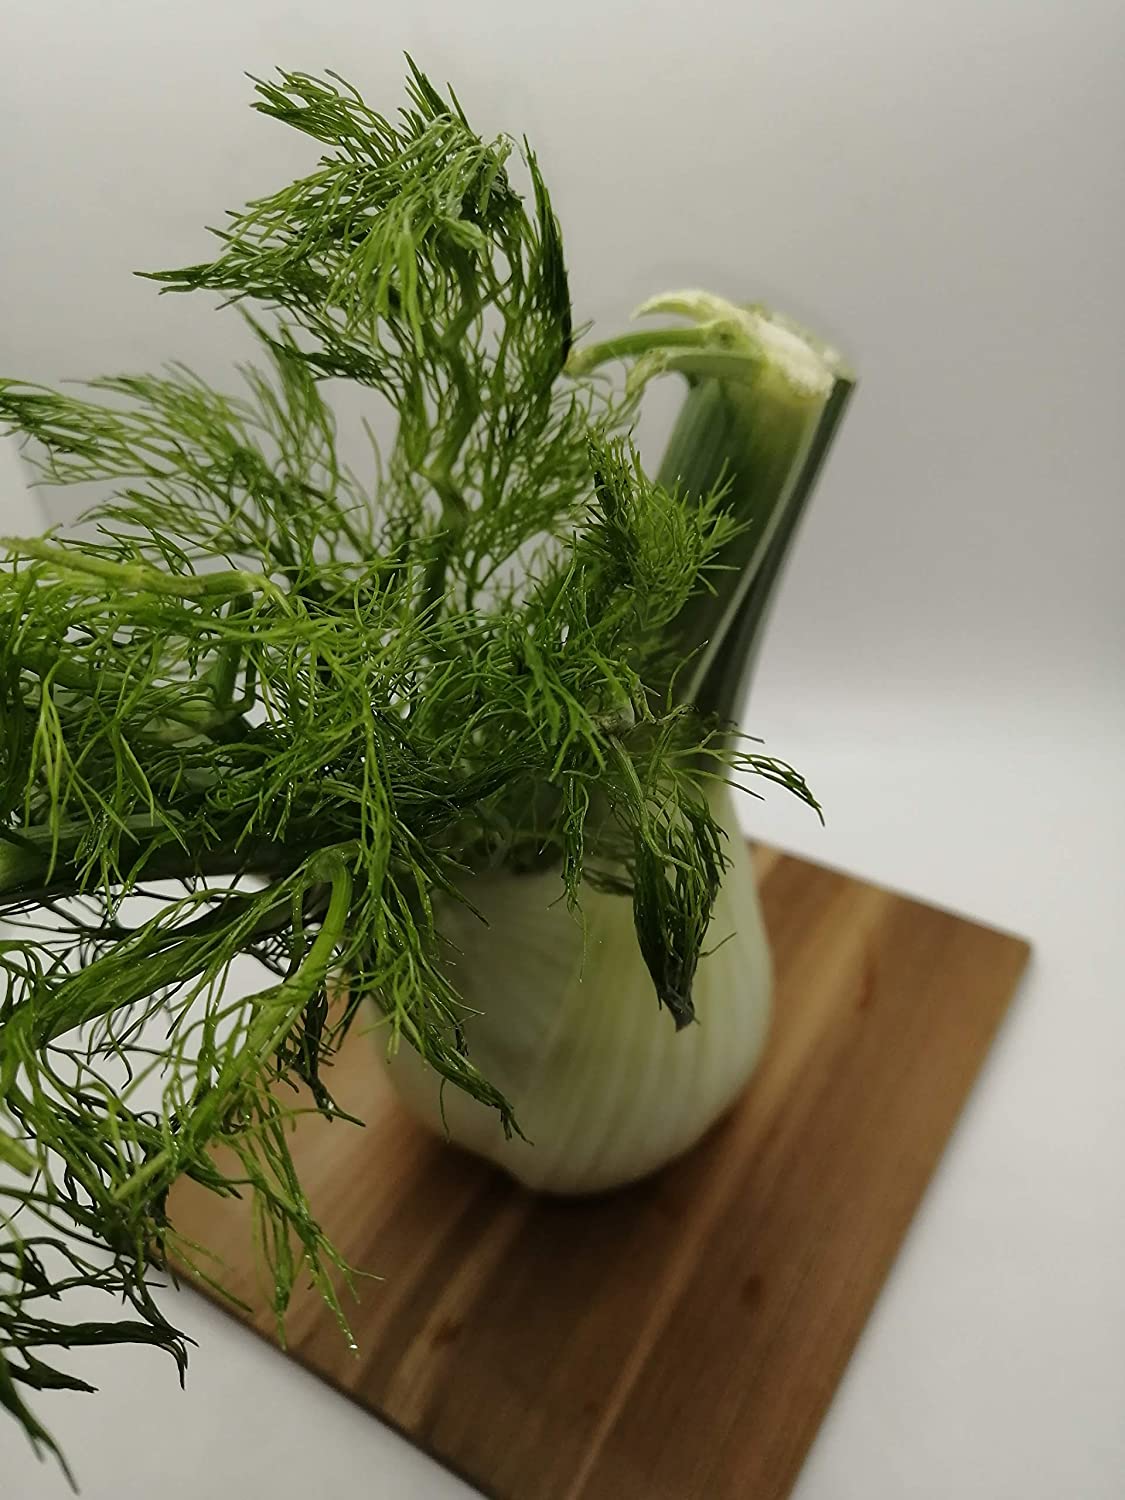 Perfection Fennel 100 Herb Seeds - Foeniculum vulgare Non-GMO Sweet Anise Bulb Forming Aromatic Plant, Excellent for Herb, Vegetable, and Butterfly Garden